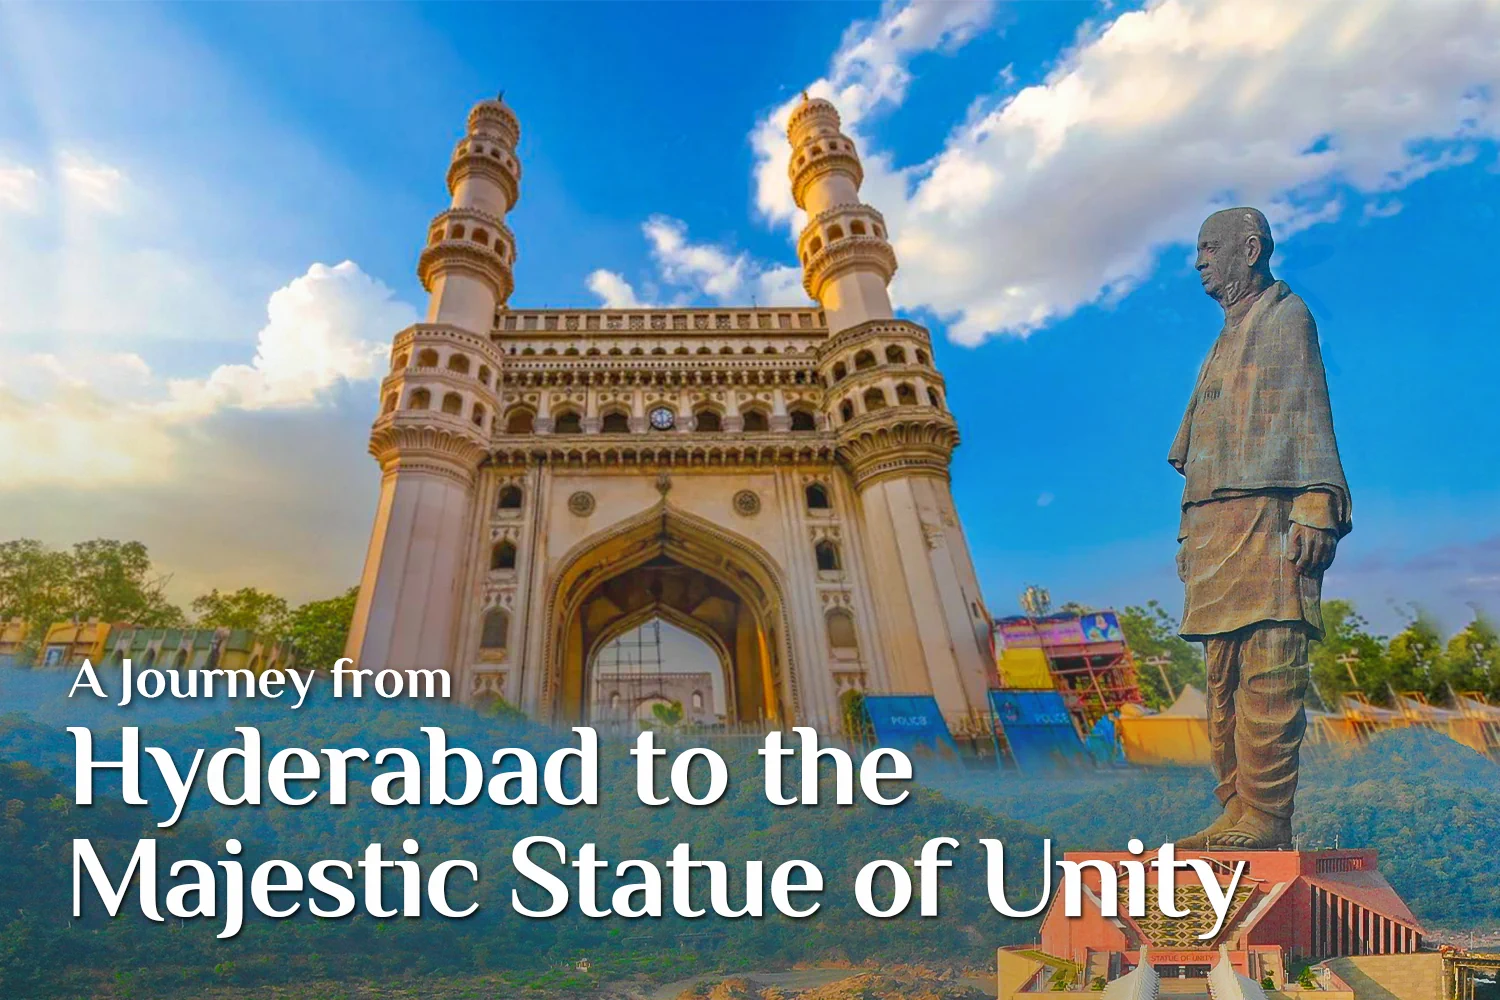 The World's Tallest - The Statue of Unity